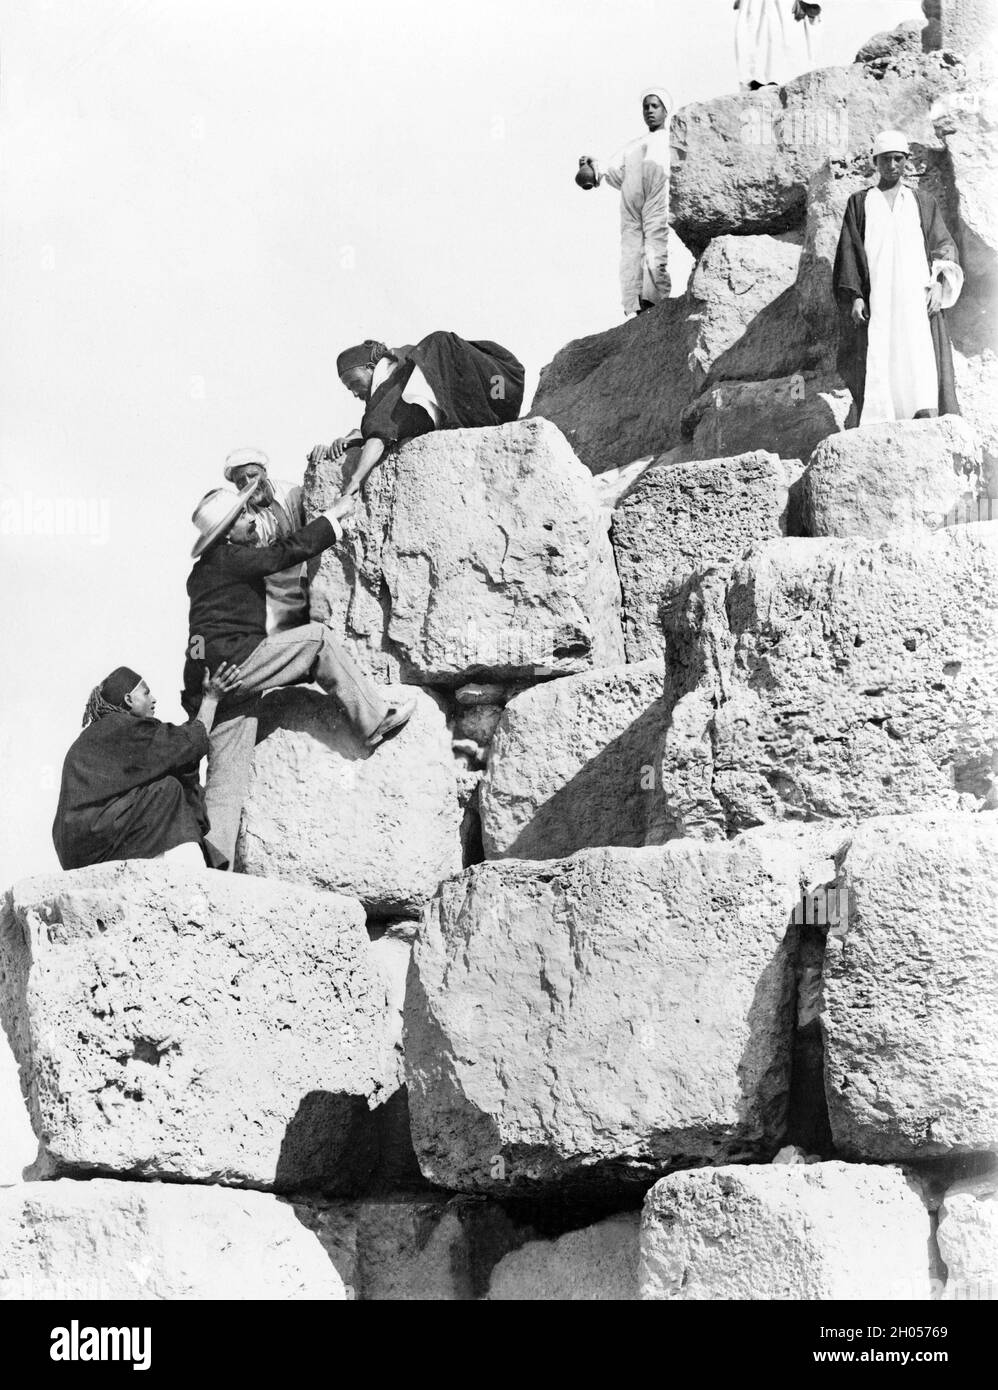 A vintage photo circa 1880 of a tourist being helped by local Egyptians to climb the Great Pyramid of Giza. Also known as the Pyramid of Khufu or the Pyramid of Cheops.   Climbing the pyramids is now banned in the present day. Stock Photo